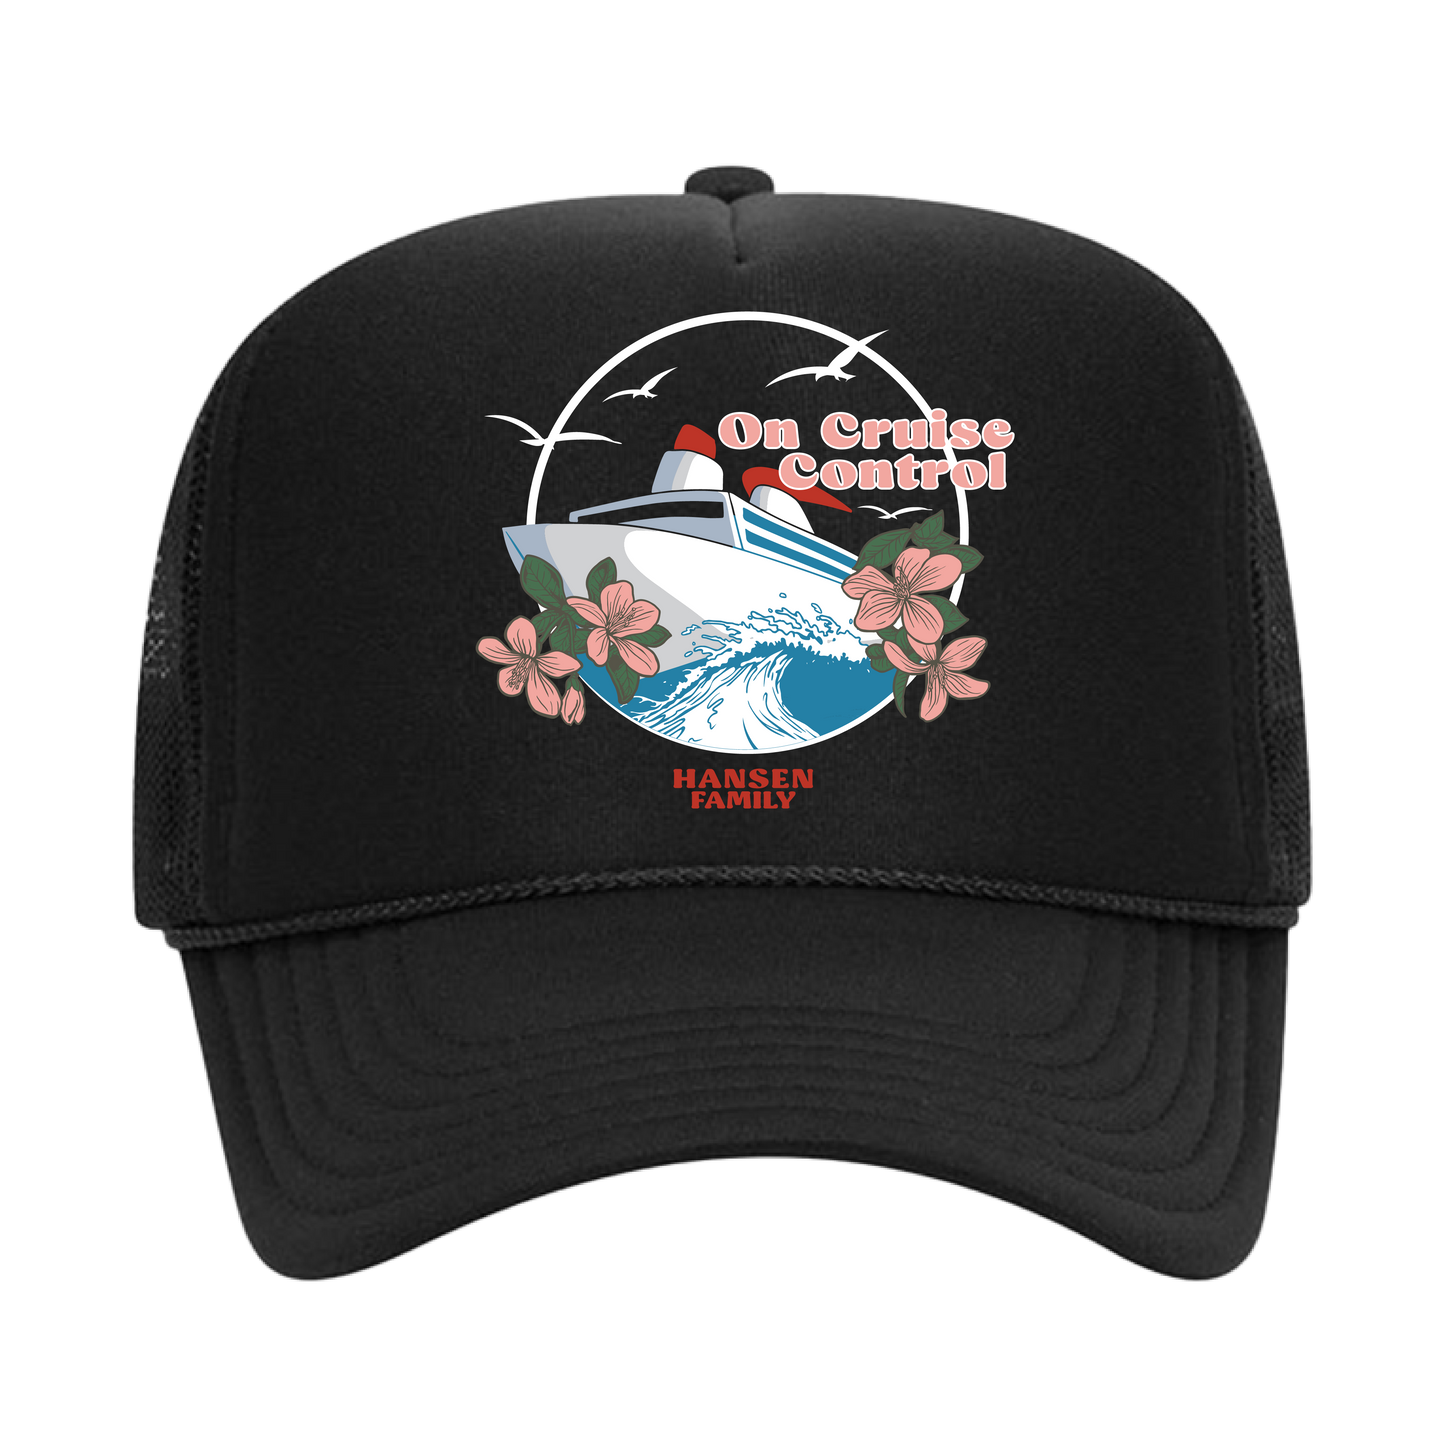 Cruise Control - Unisex Personalized Trucker Hat